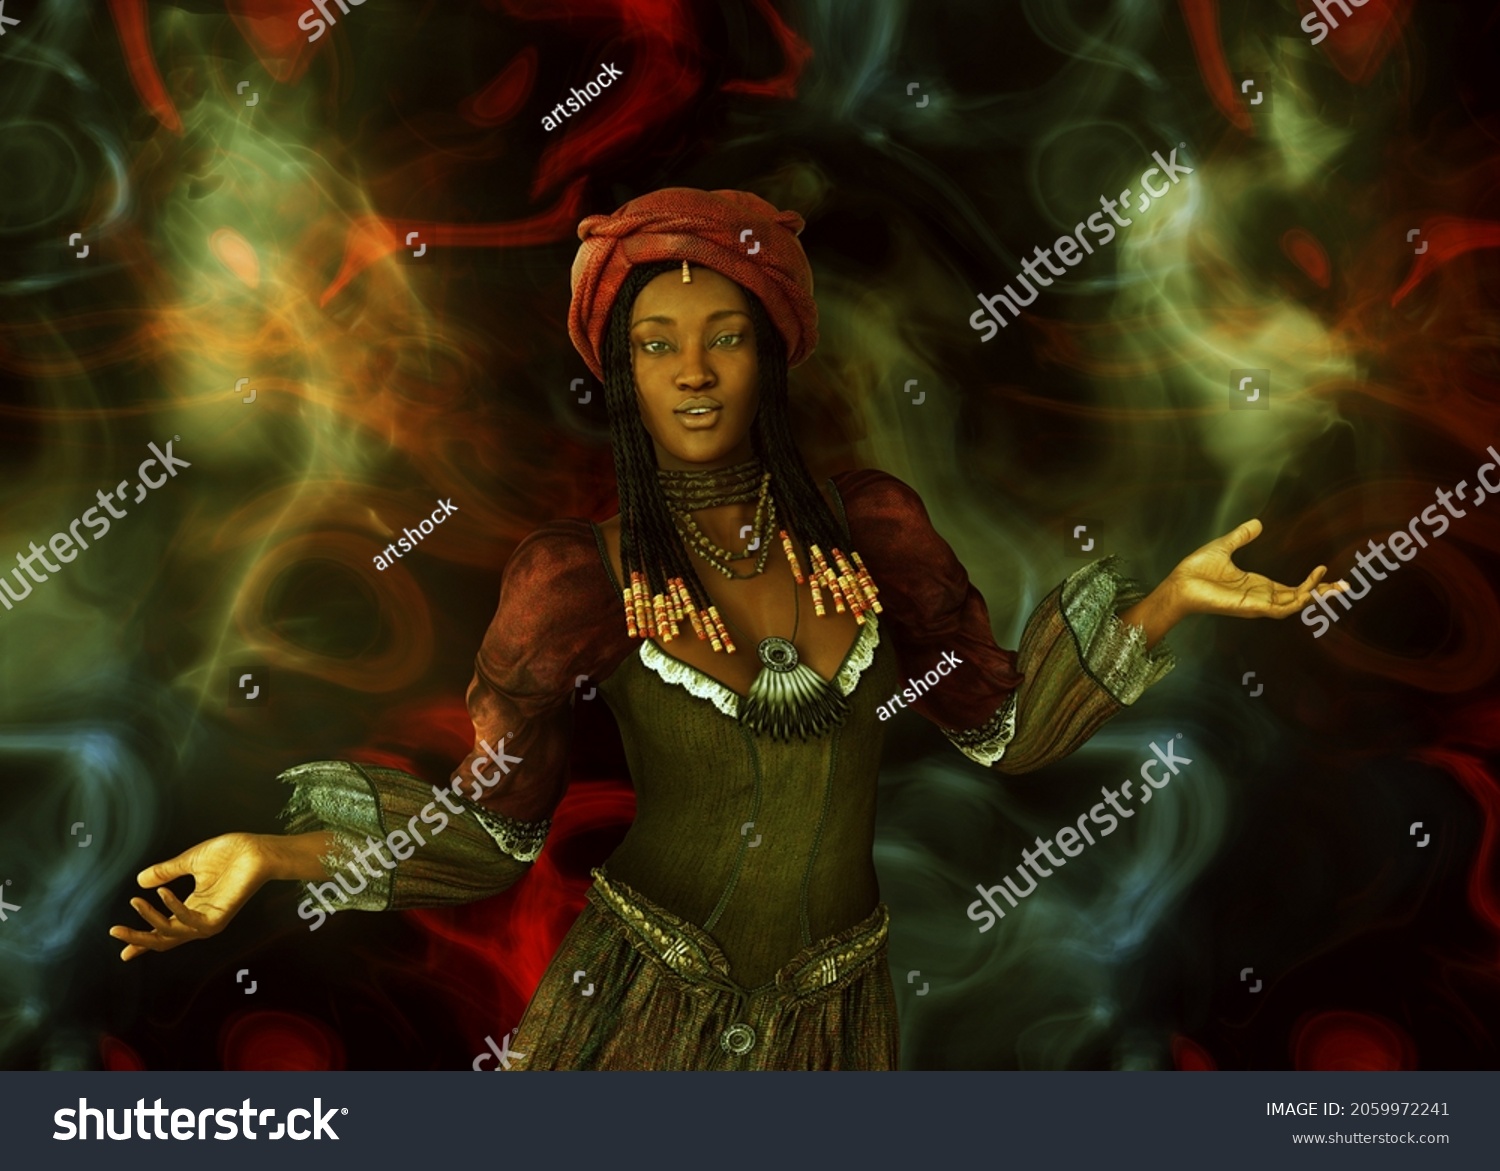 Black Woman As A Witch Images Stock Photos Vectors Shutterstock